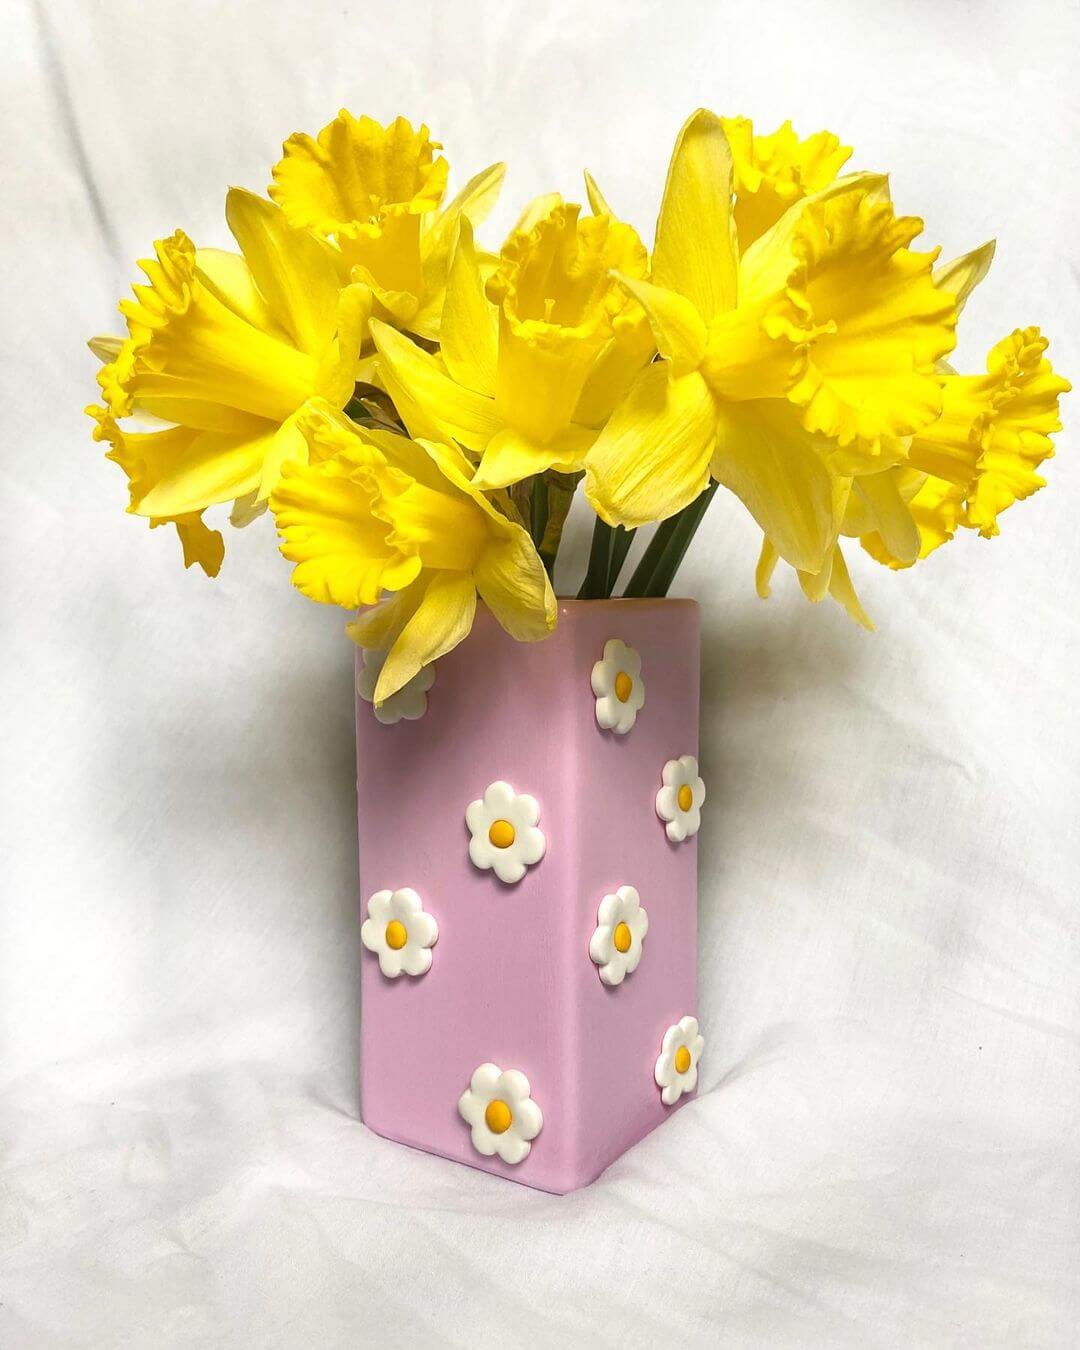 Lilac vase with polymer clay 3D daisies and daffodils inside the vase.